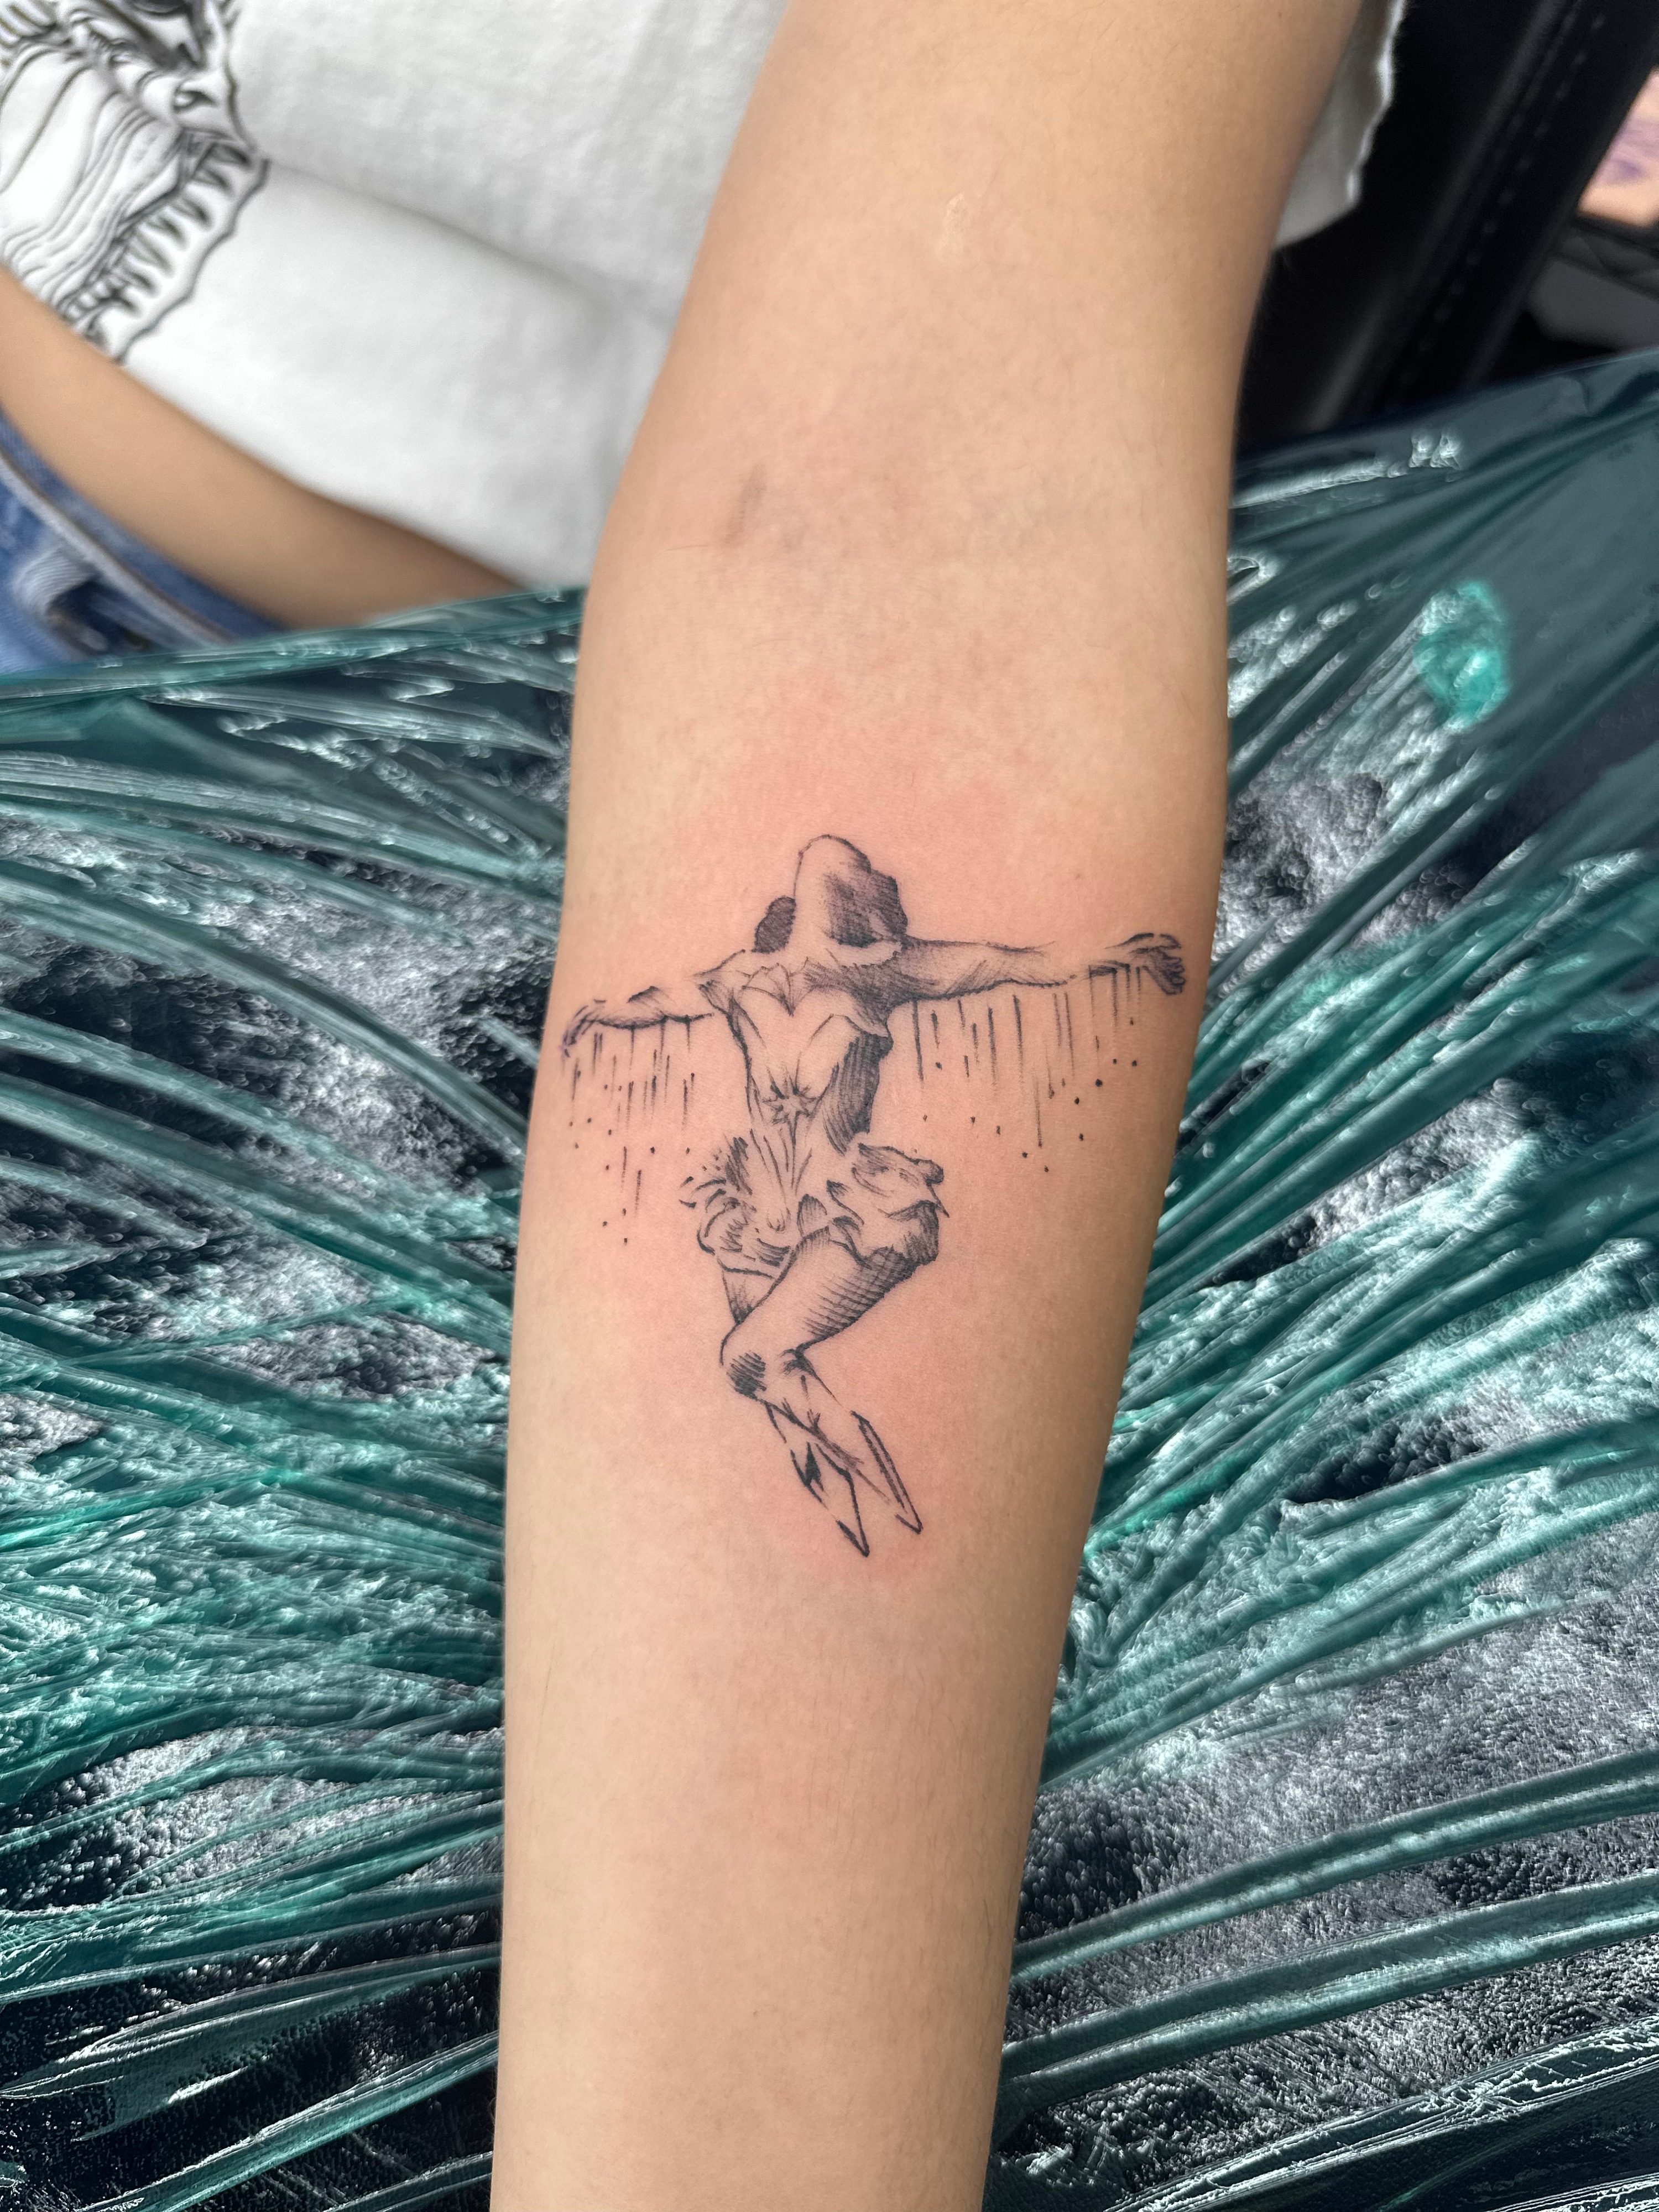 What's your shitty/trashy/dumb tattoo that you actually love? I'll go first  with my cherub dancing with maracas that looks like he has a donkey D :  shittytattoos